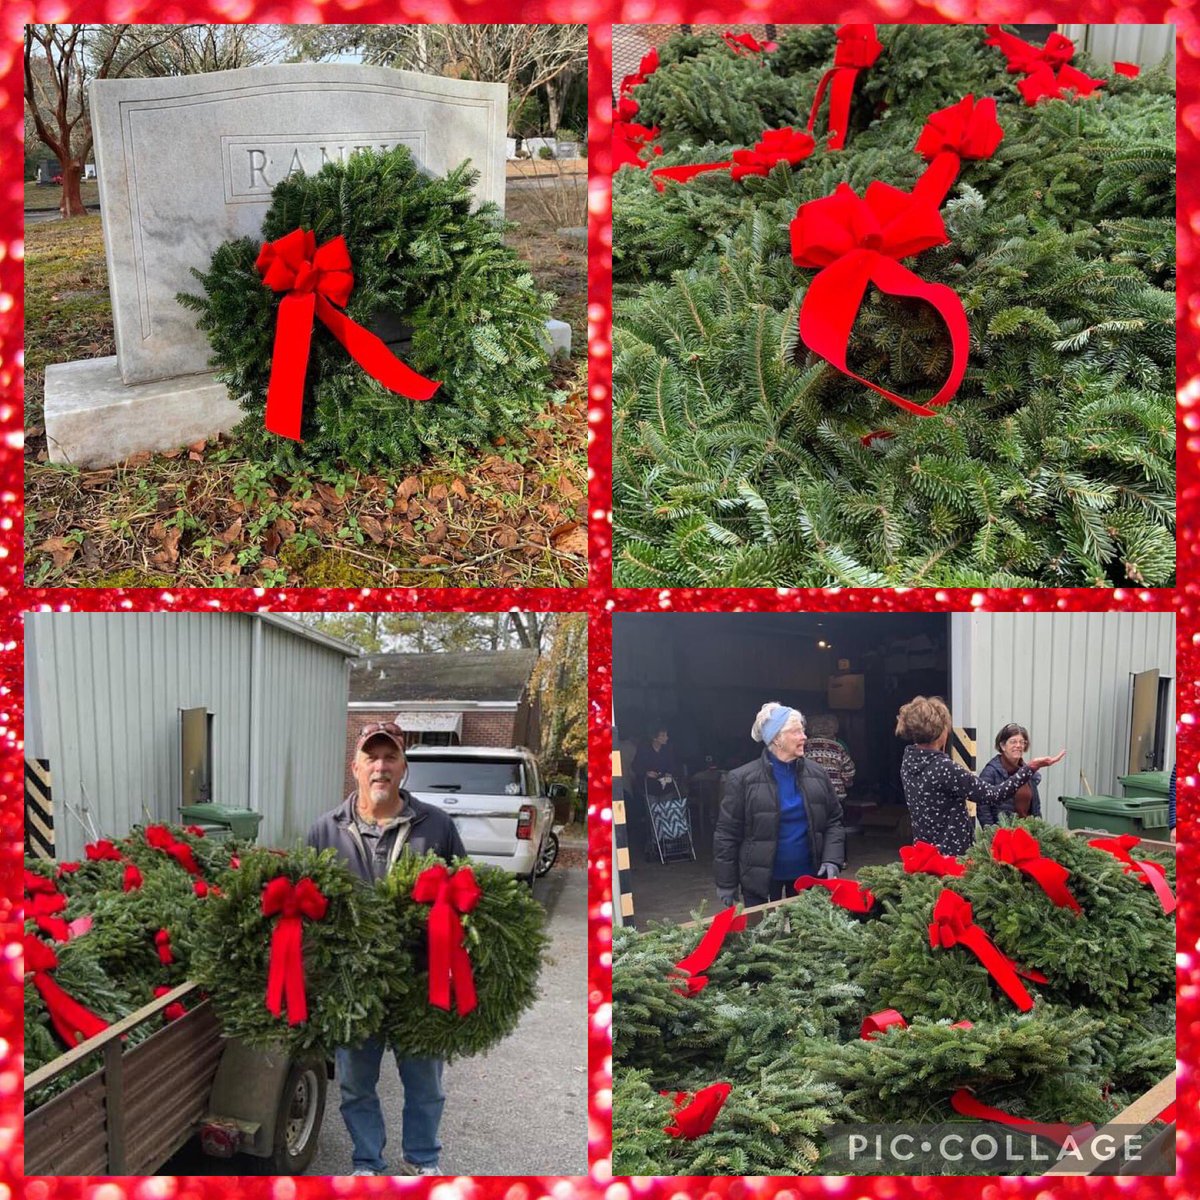 Over 150 wreaths were placed on family graves today. Thanks to all who purchased them this year from the Friends Group. Many thanks to the volunteers who helped tie the bows on the wreaths.
#OakdaleCemetery
#ChristmasWreaths
#Christmas